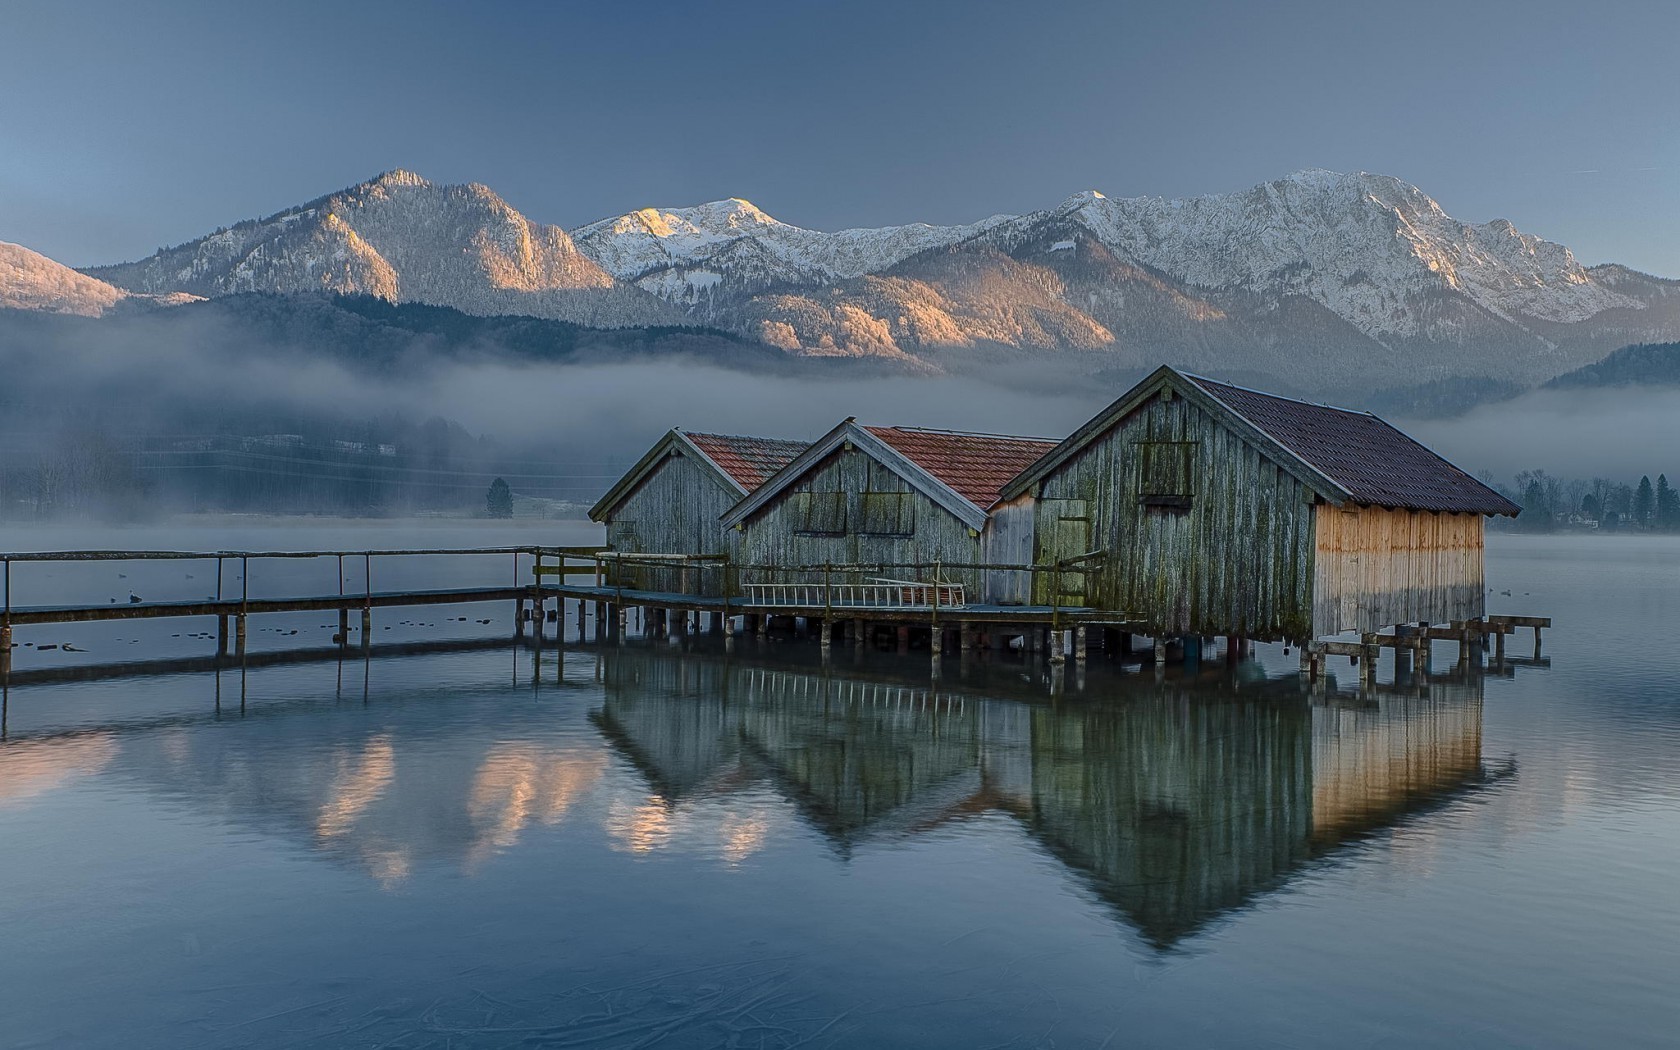 nature, Landscape, Mountain, Snow, Water, Germany, House, Mist, Trees, Forest, Sunlight, Reflection, Pier, Lake Wallpaper